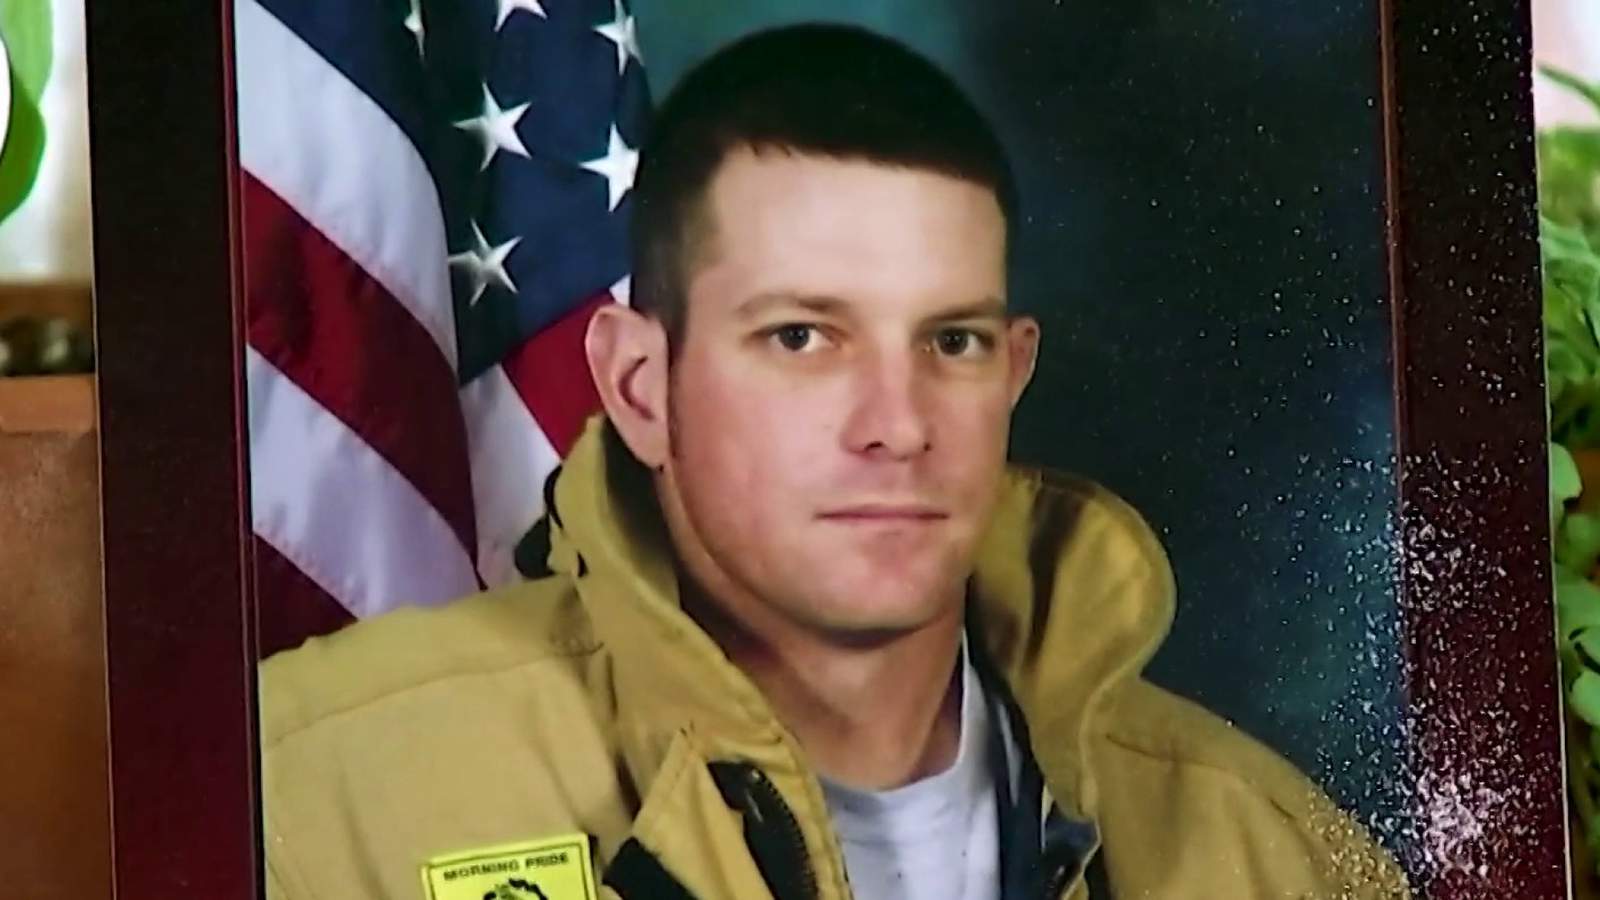 Seminole firefighter dies 23 days after county rejects cancer benefits